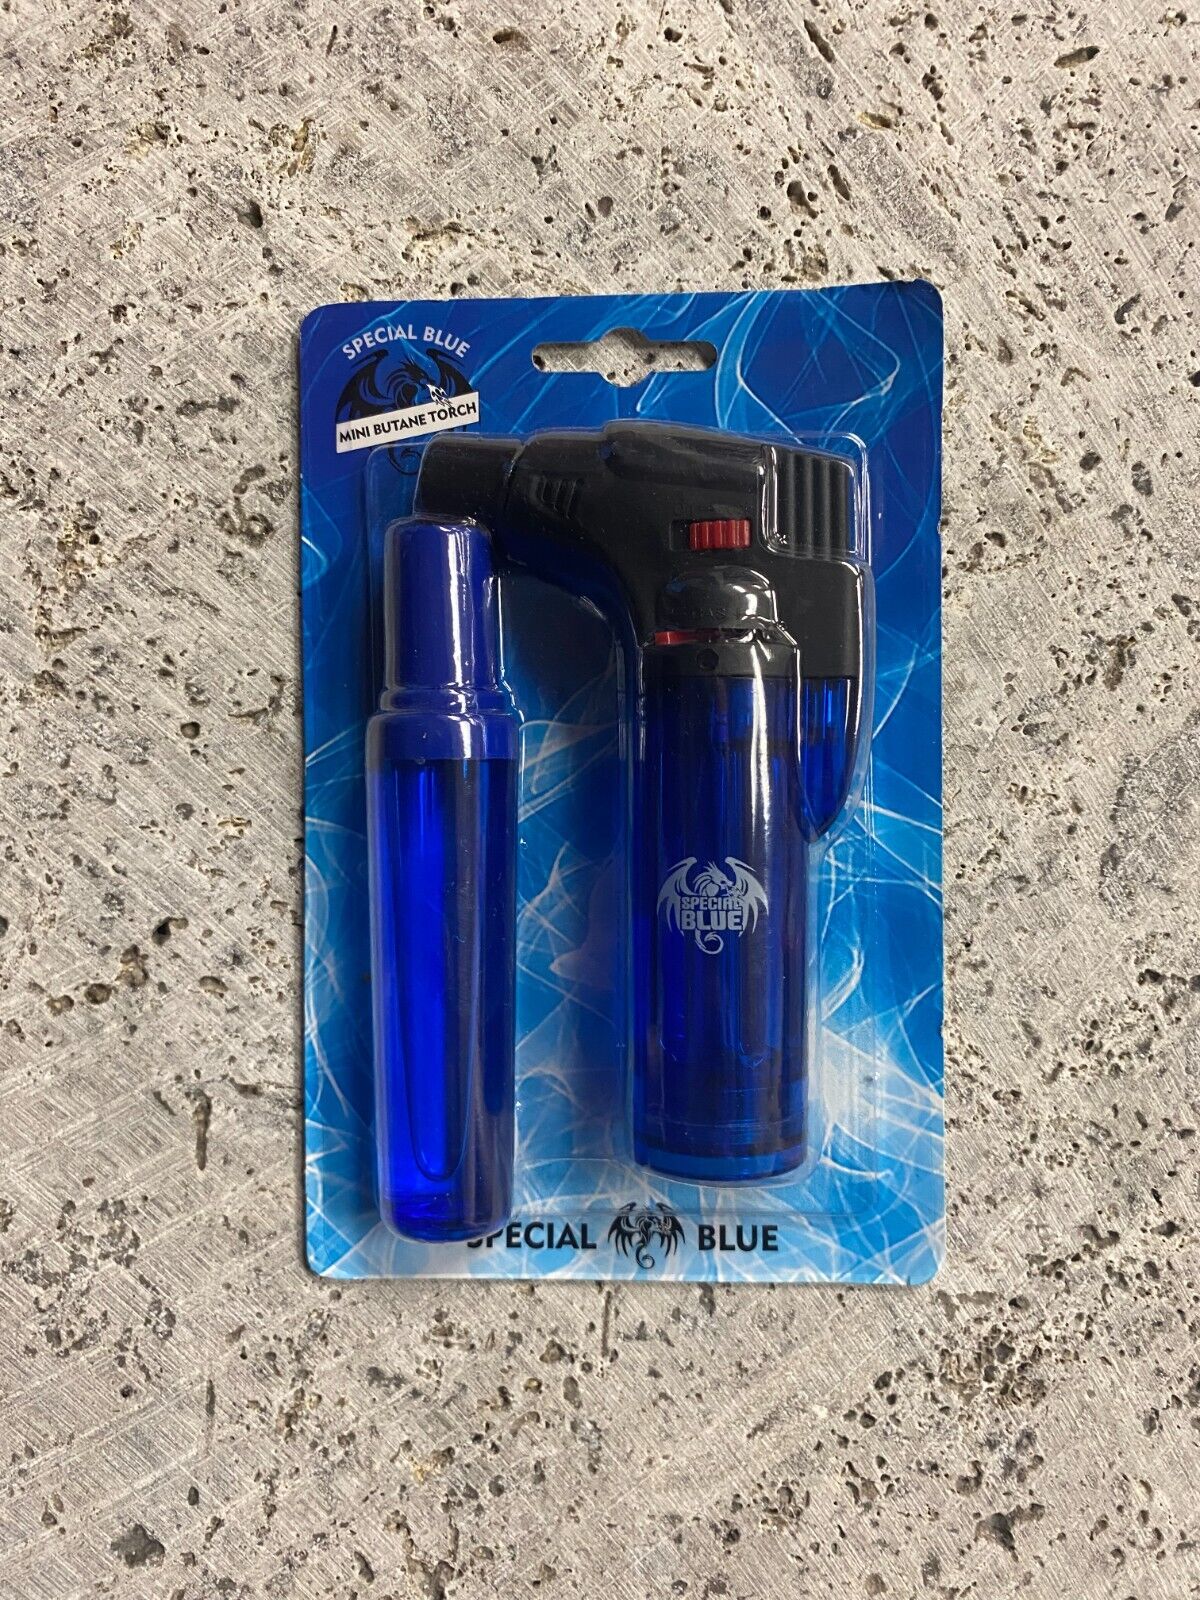 Special Blue Torch Lighter Bernie Reload with butane refill tank.